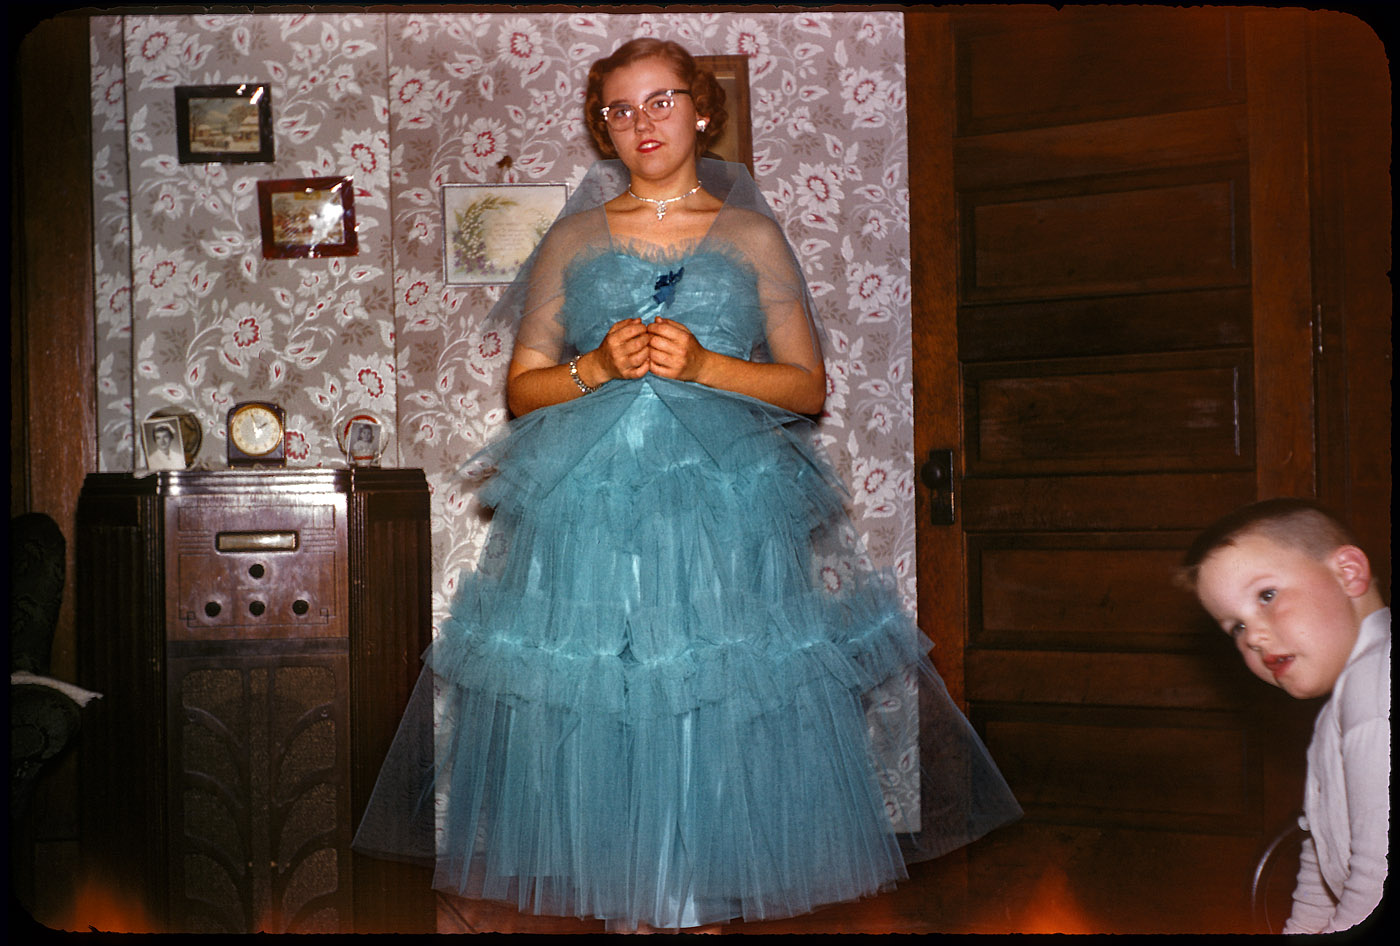 Big sister, a vision in turquoise tulle. Somewhere in the United States circa 1952. Found 35mm Kodachrome transparency, Set 2. View full size.